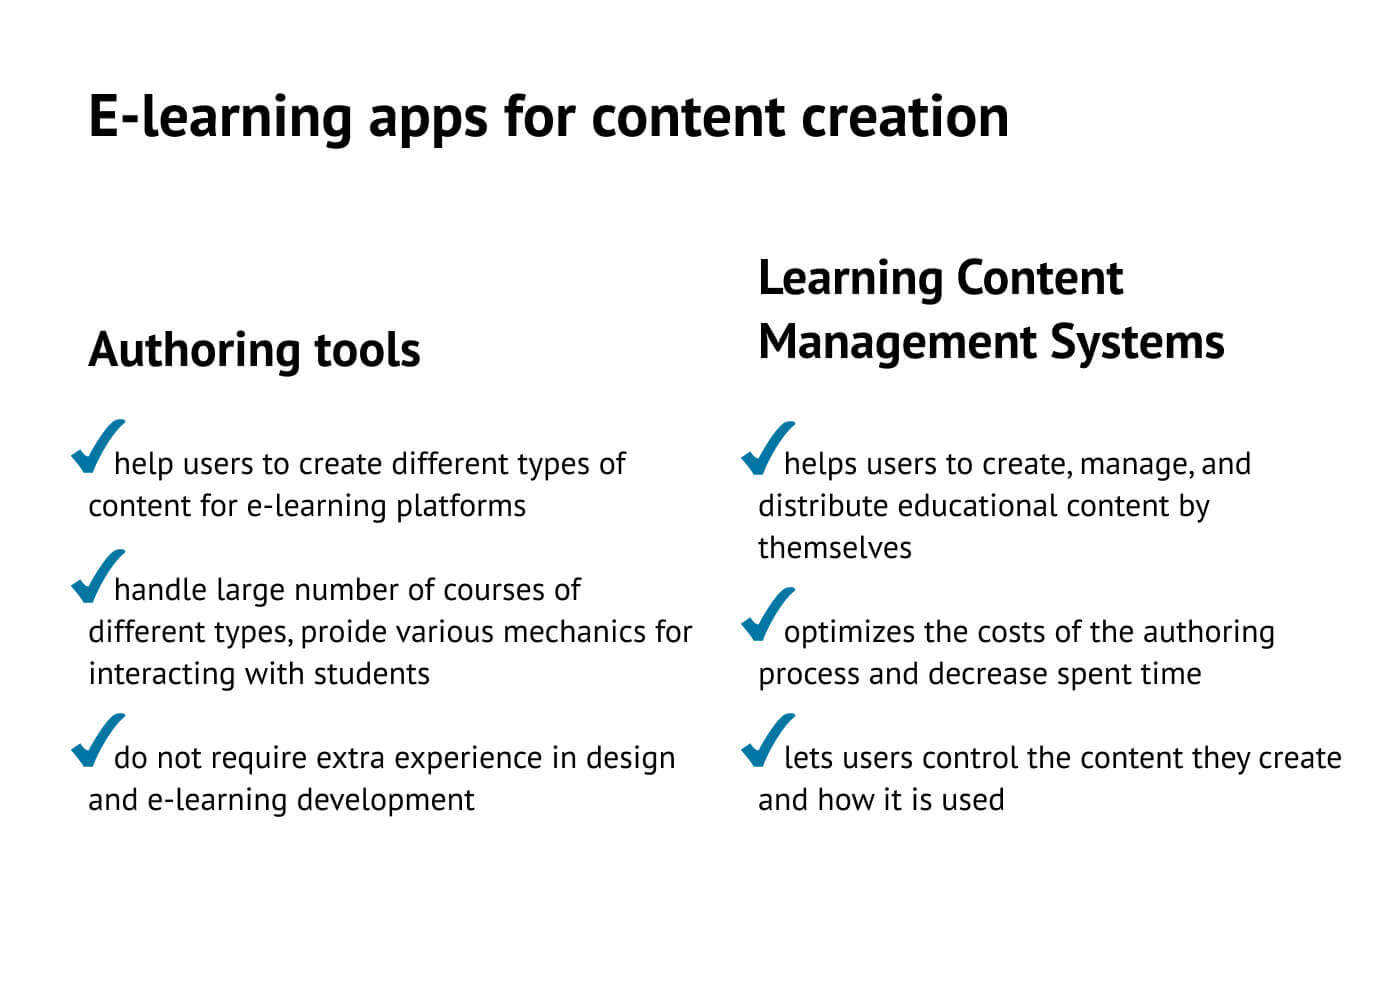 E-learning apps for content creation